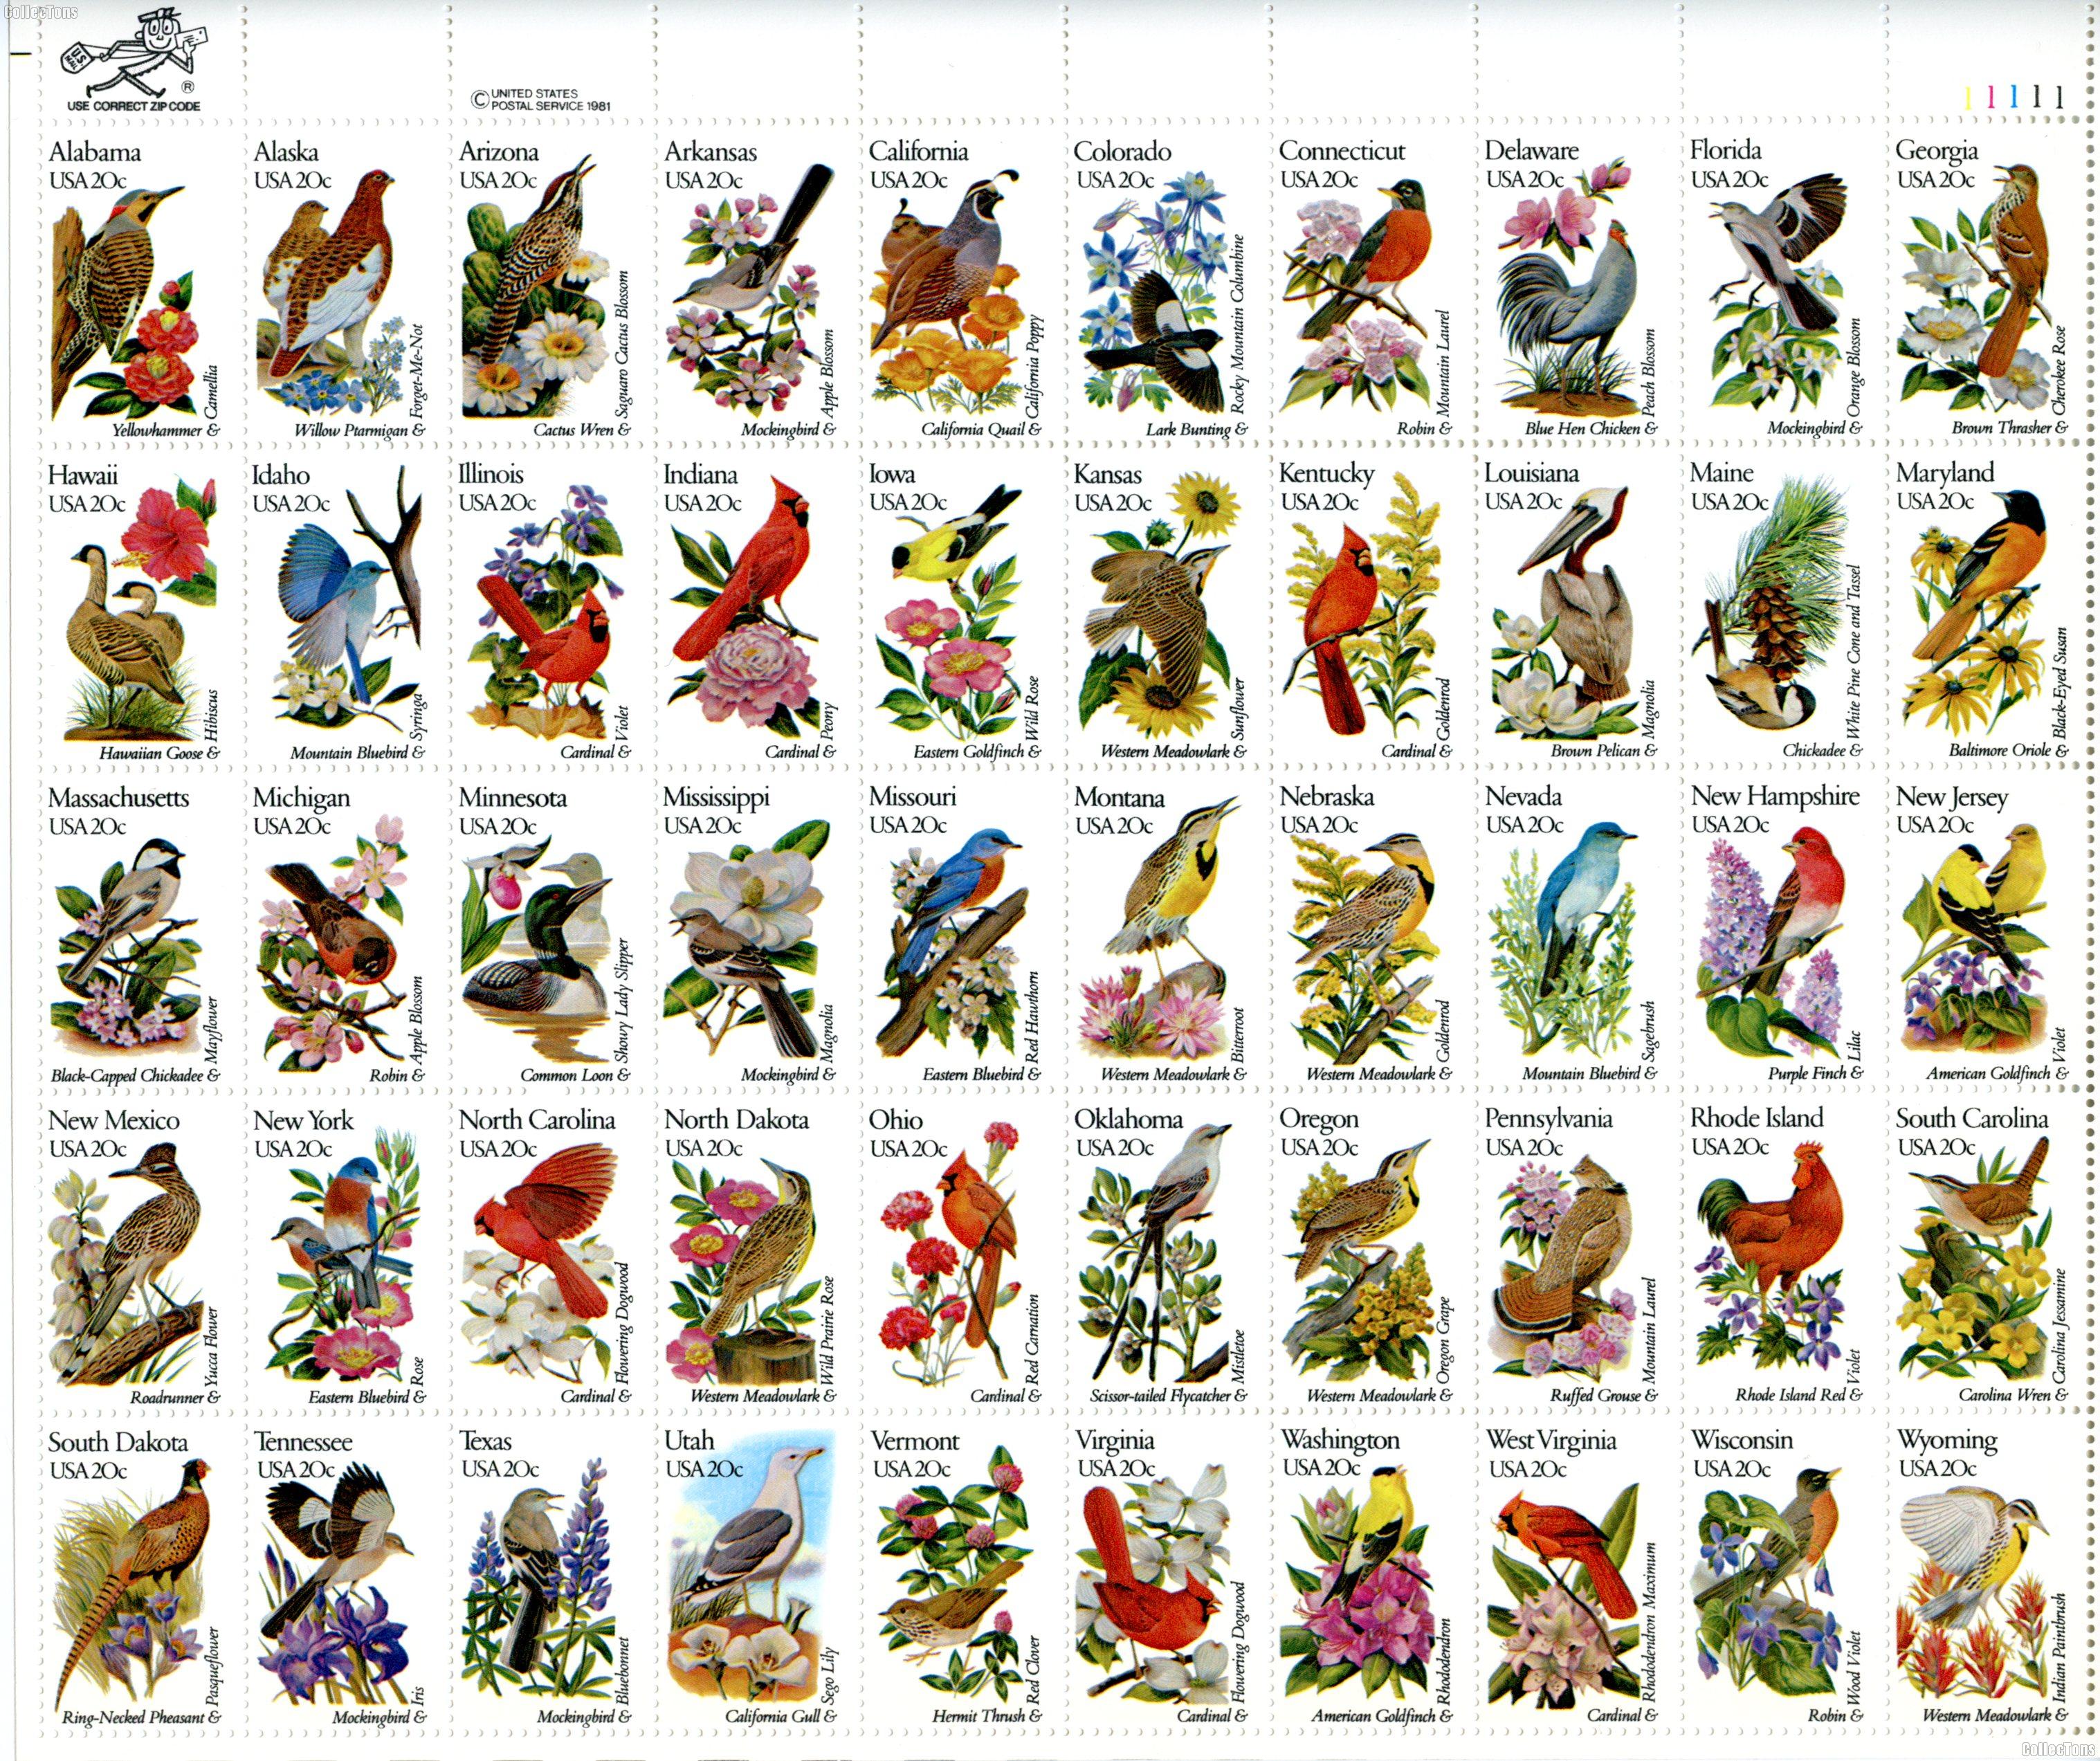 1982 State Birds and Flowers 20 Cent US Postage Stamp MNH Sheet of 50 Scott #1953-2002